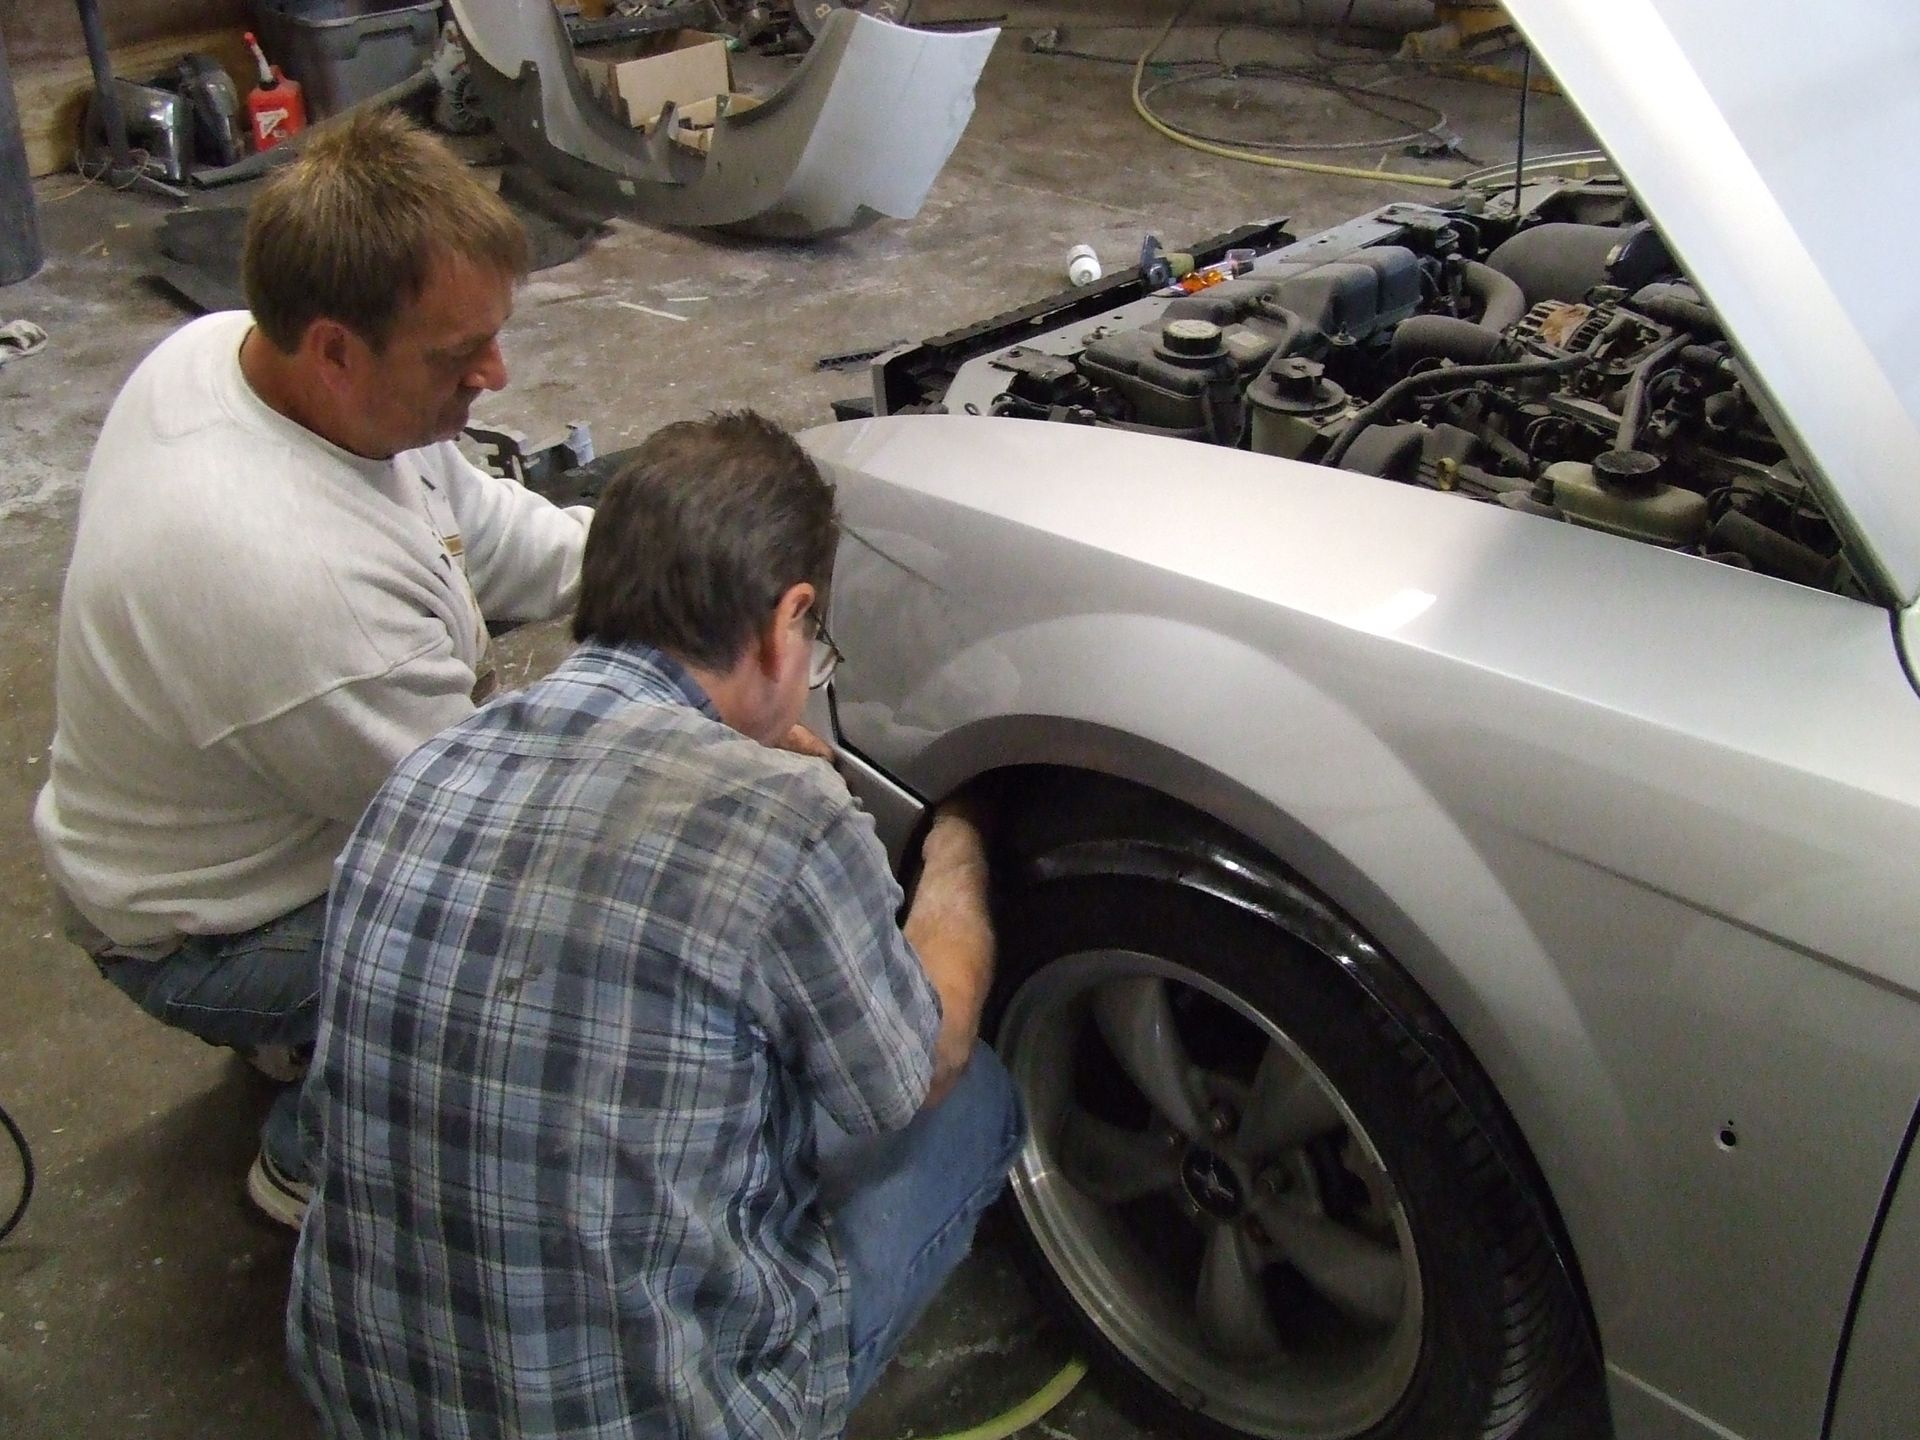 two men are working on a silver car with the hood open